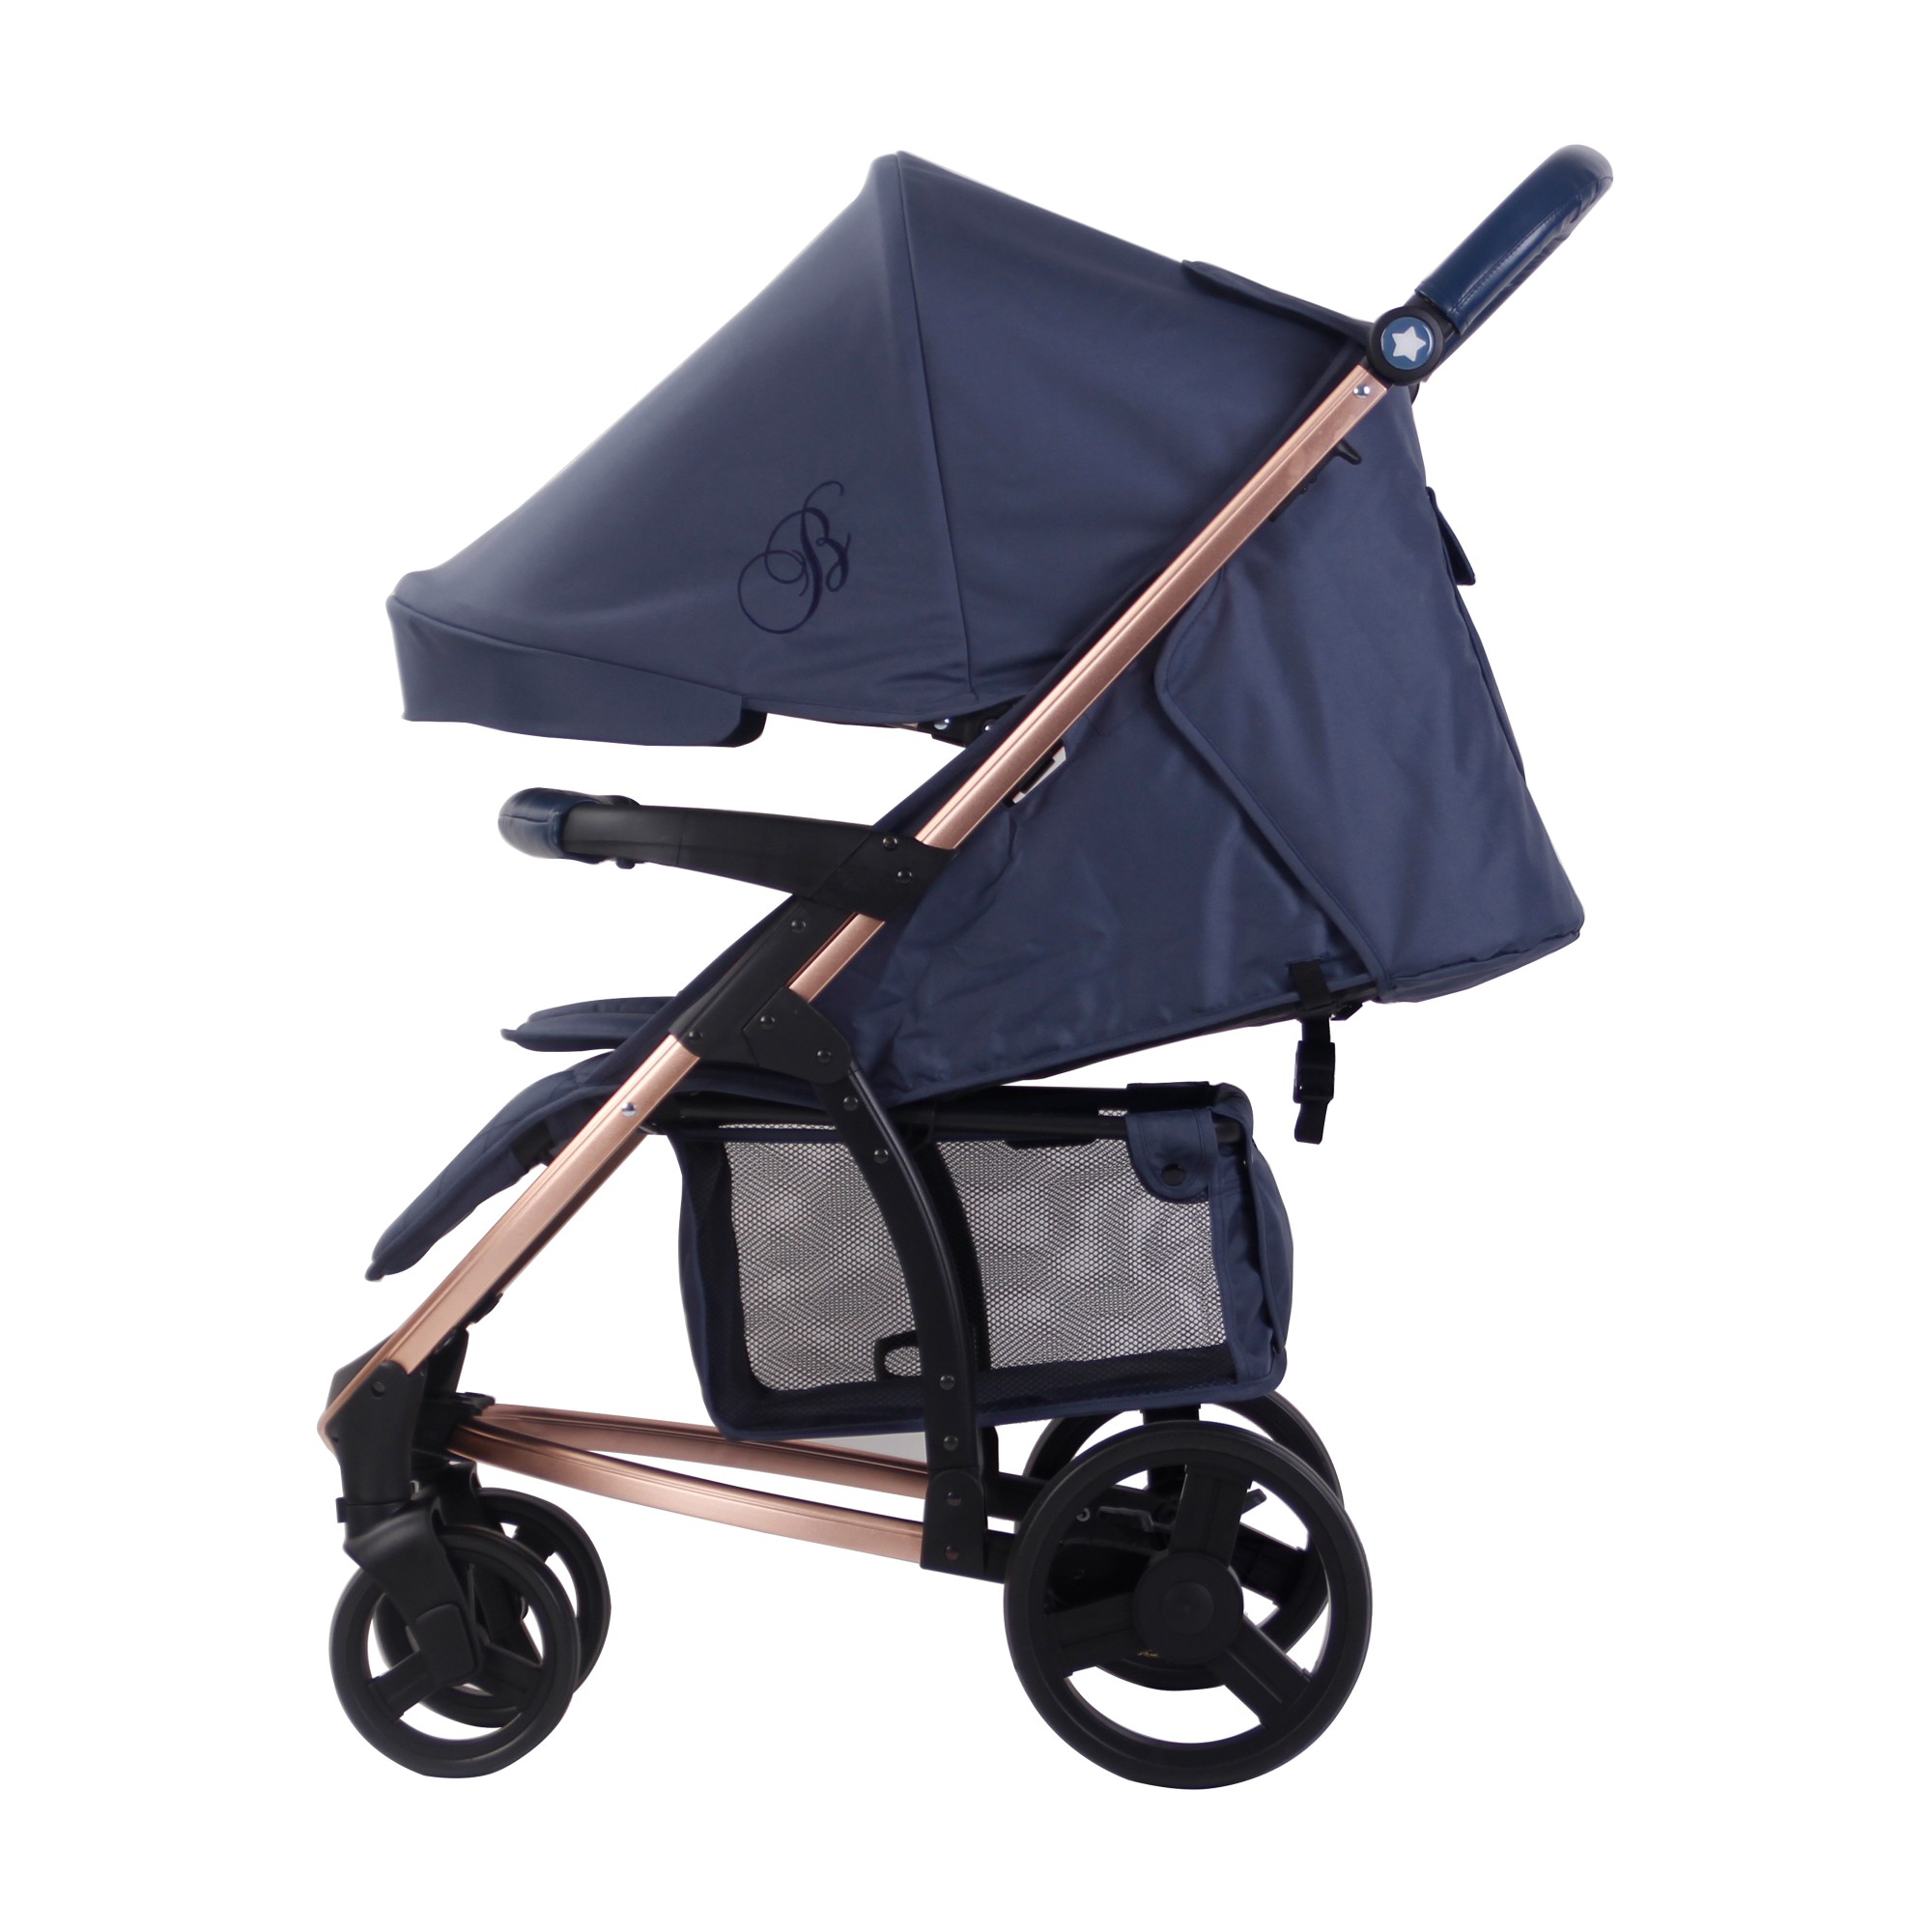 my babiie rose gold and navy stroller